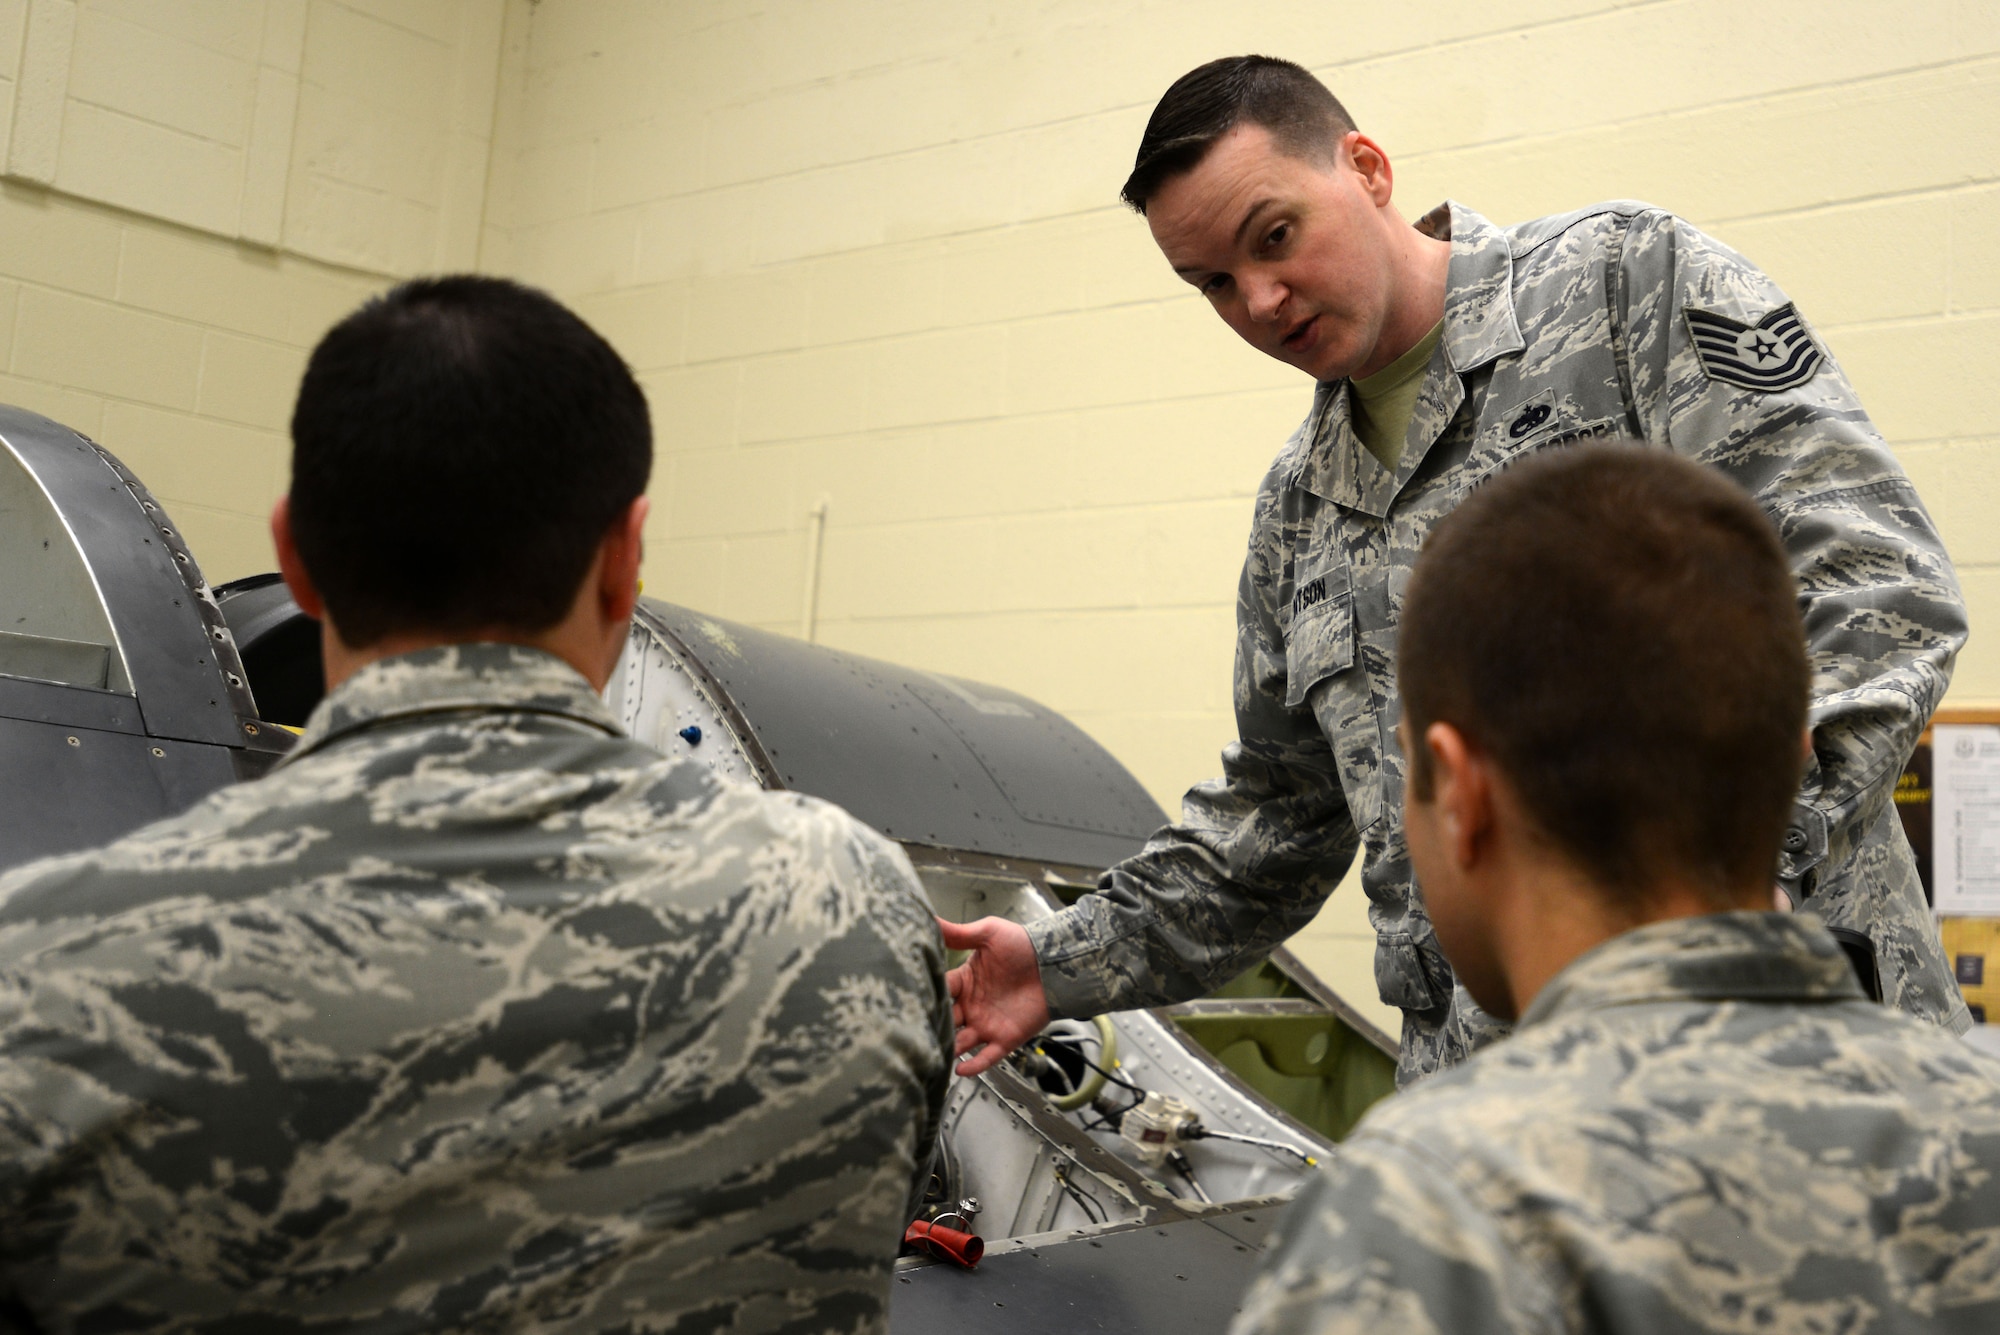 U.S. Air Force Tech. Sgt. Christopher Watson, 372nd Training Squadron, Detachment 202 F-16 armament systems instructor, explains the final steps of a gun hydraulic bleed and leak test to Senior Airman Brent Brocklehurst, weapons load crew member assigned to the 325th Aircraft Maintenance Squadron out of Tyndall Air Force Base, Fla., and Senior Airman Collin Reeder, weapons standardization technician assigned to the 96th Maintenance Group out of Eglin AFB, Fla., during training at the 372nd Training Squadron, Detachment 202 F-16 Field Training Detachment (FTD) at Shaw Air Force Base, S.C., April 25, 2017. Training at the FTD is not specific to F-16 aircraft; it also focuses on the maintenance of the equipment and munitions needed to keep the aircraft in the fight. (U.S. Air Force photo by Senior Airman Kelsey Tucker)